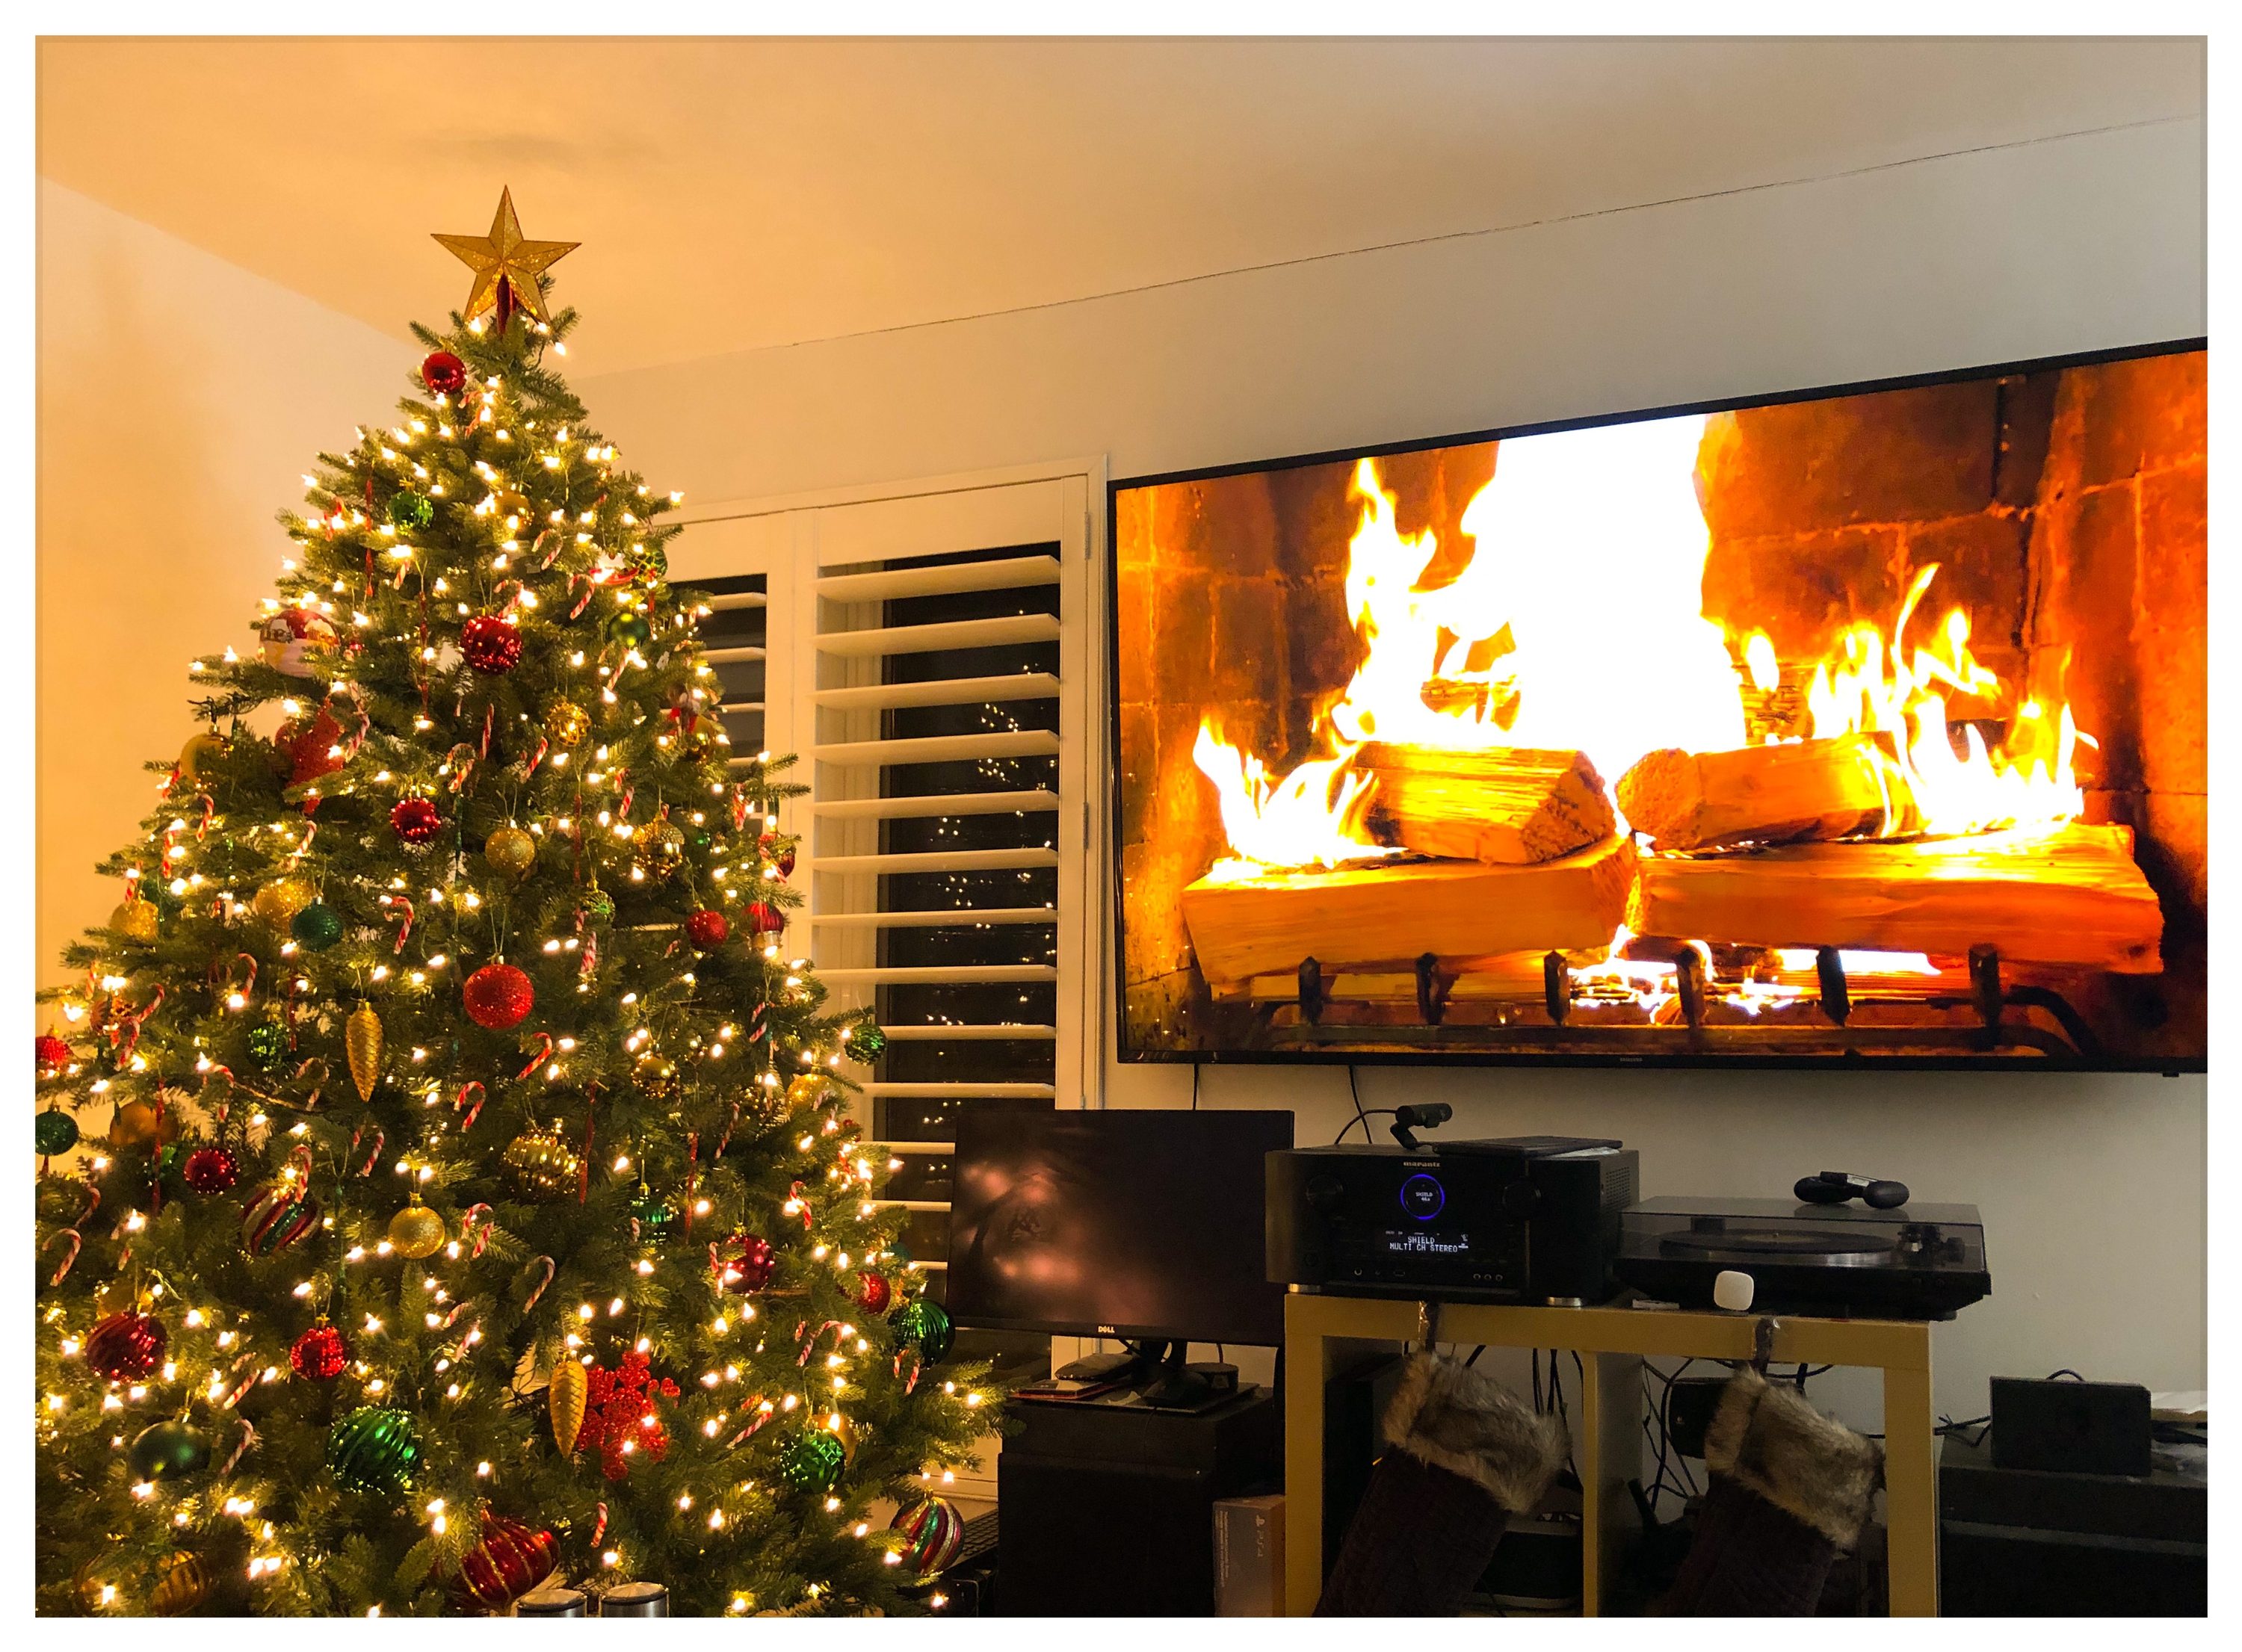 fully decorated and a 75 inch fire place